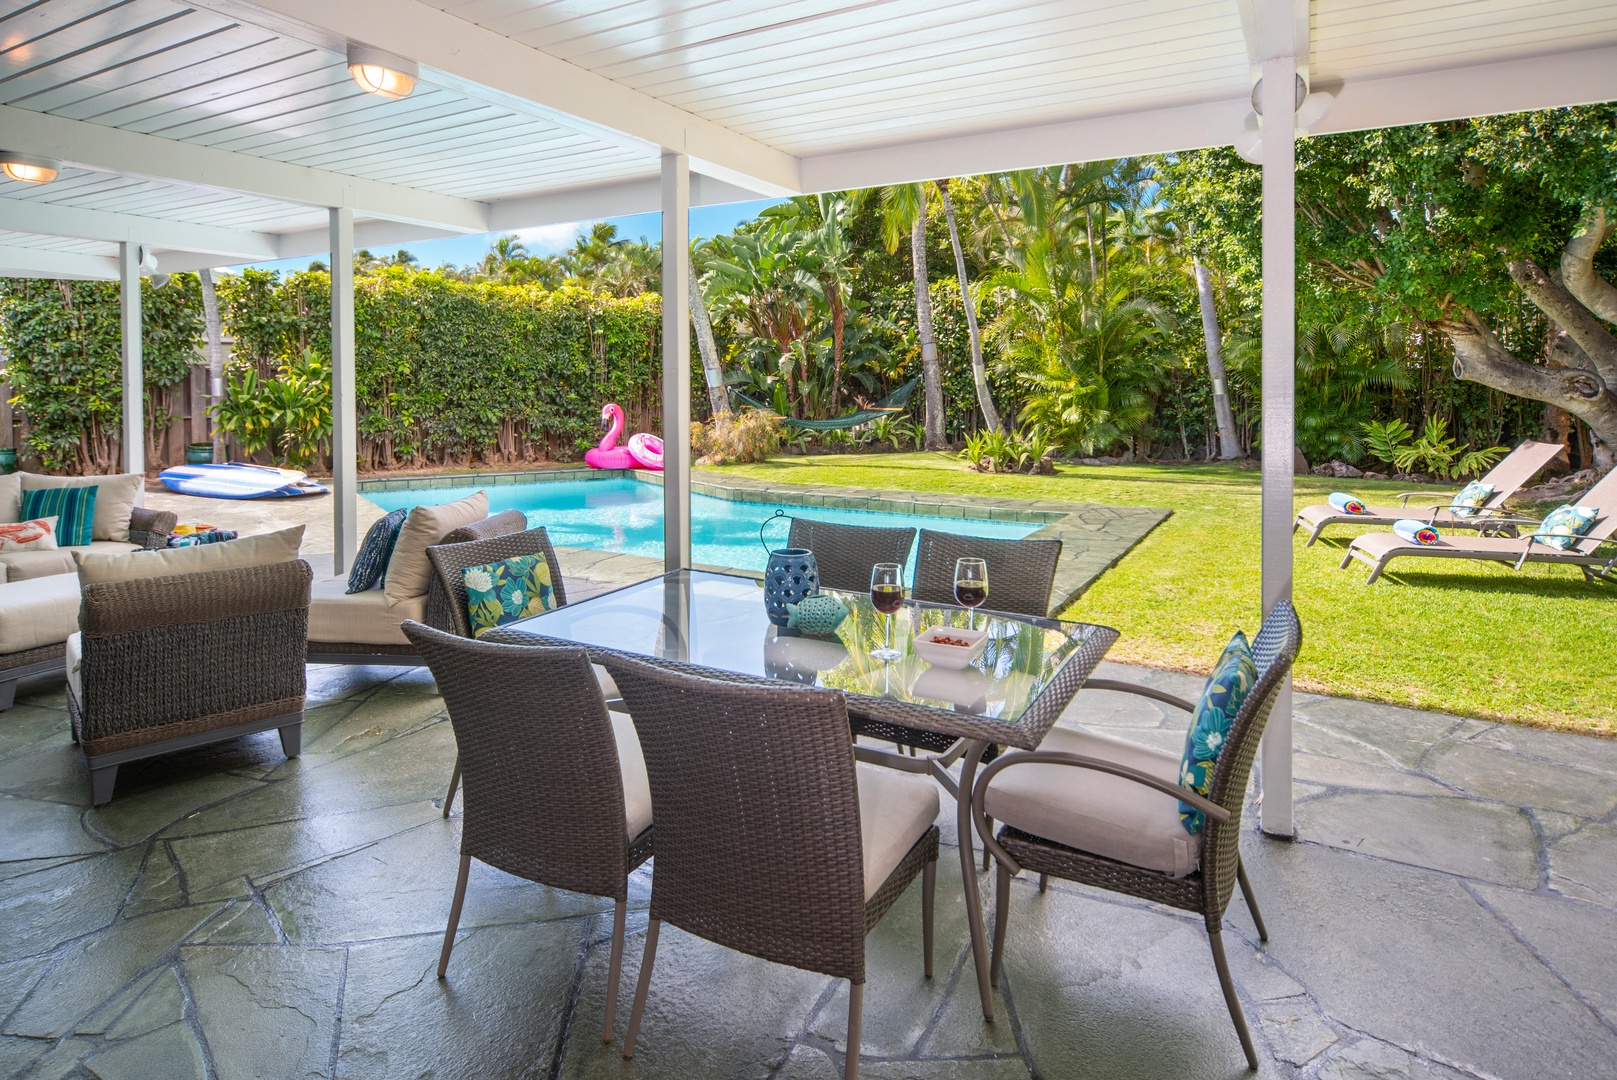 Honolulu Vacation Rentals, Hale Niuiki - View from the dining room. Couches and cozy seating areas throughout the back yard. Child safety fence available